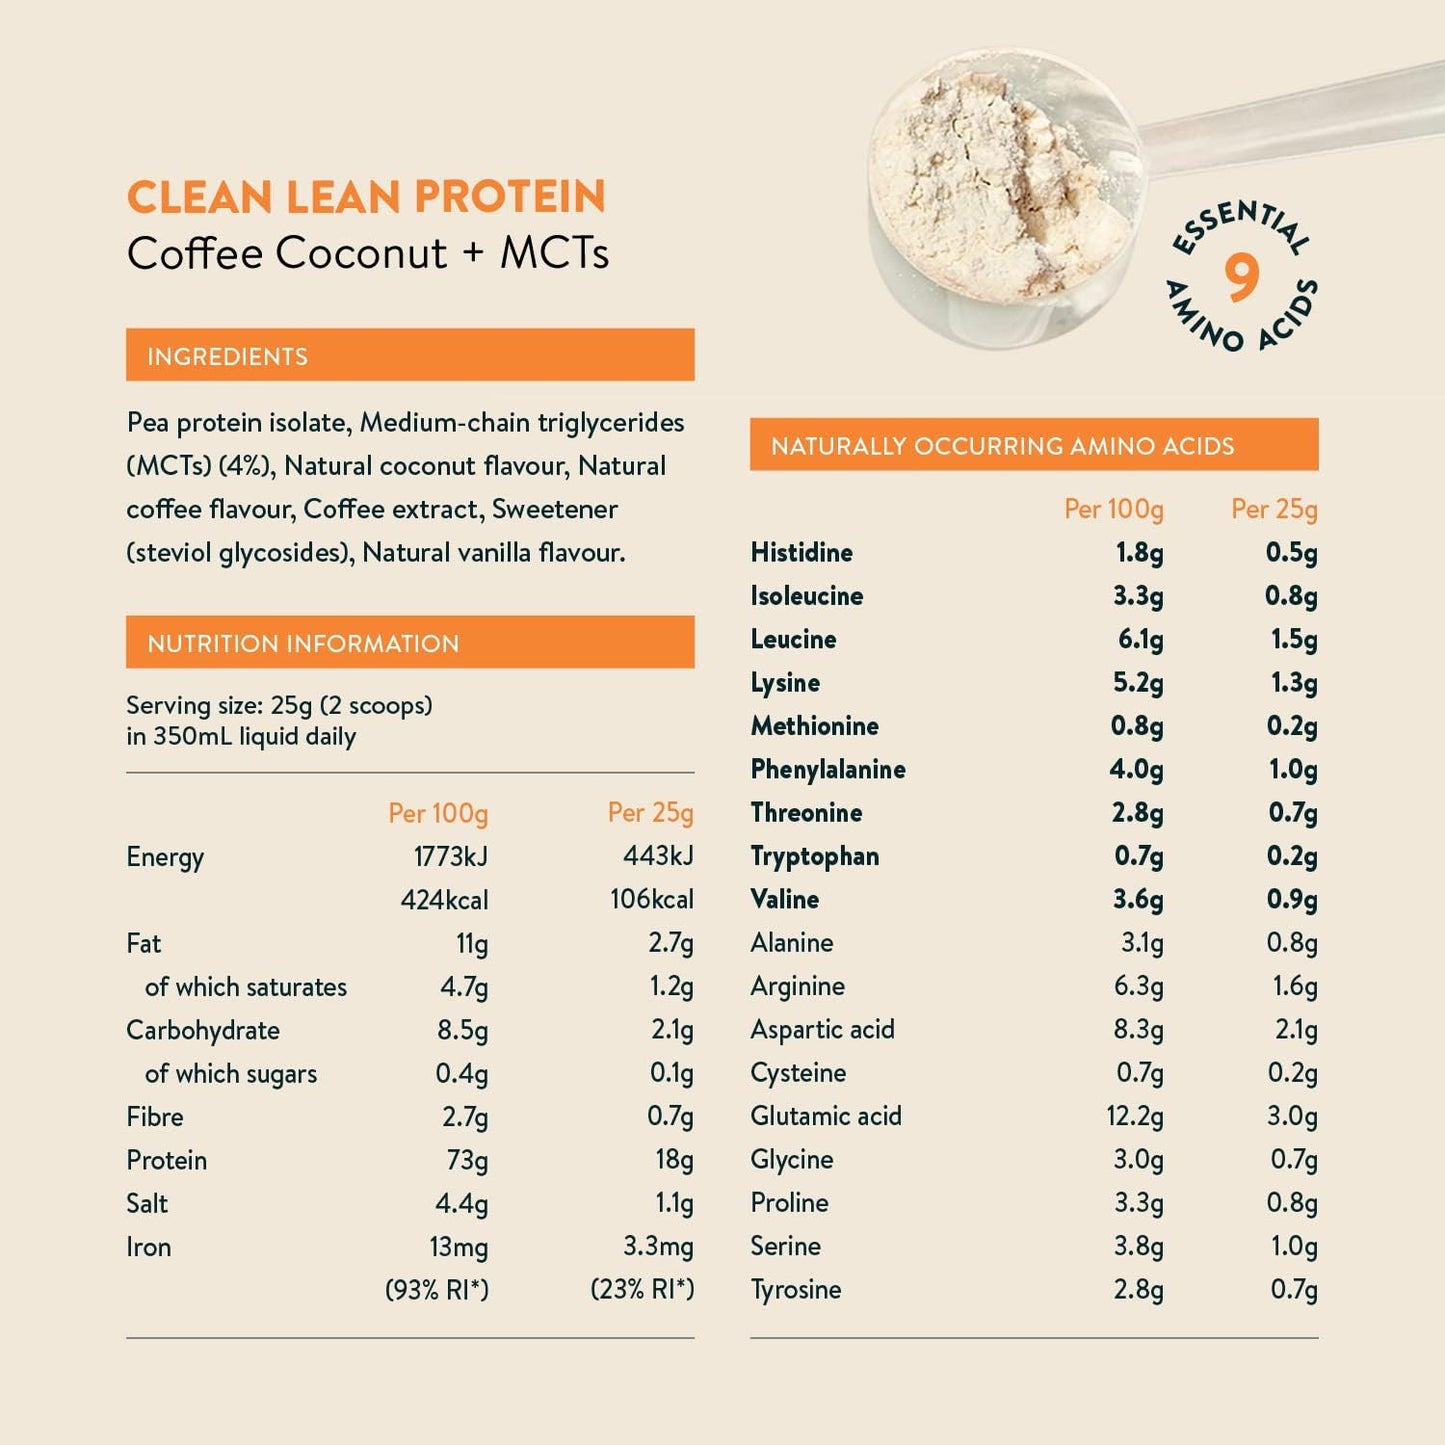 Clean Lean Protein Functional Flavours, Coffee Coconut + MCTs 500g